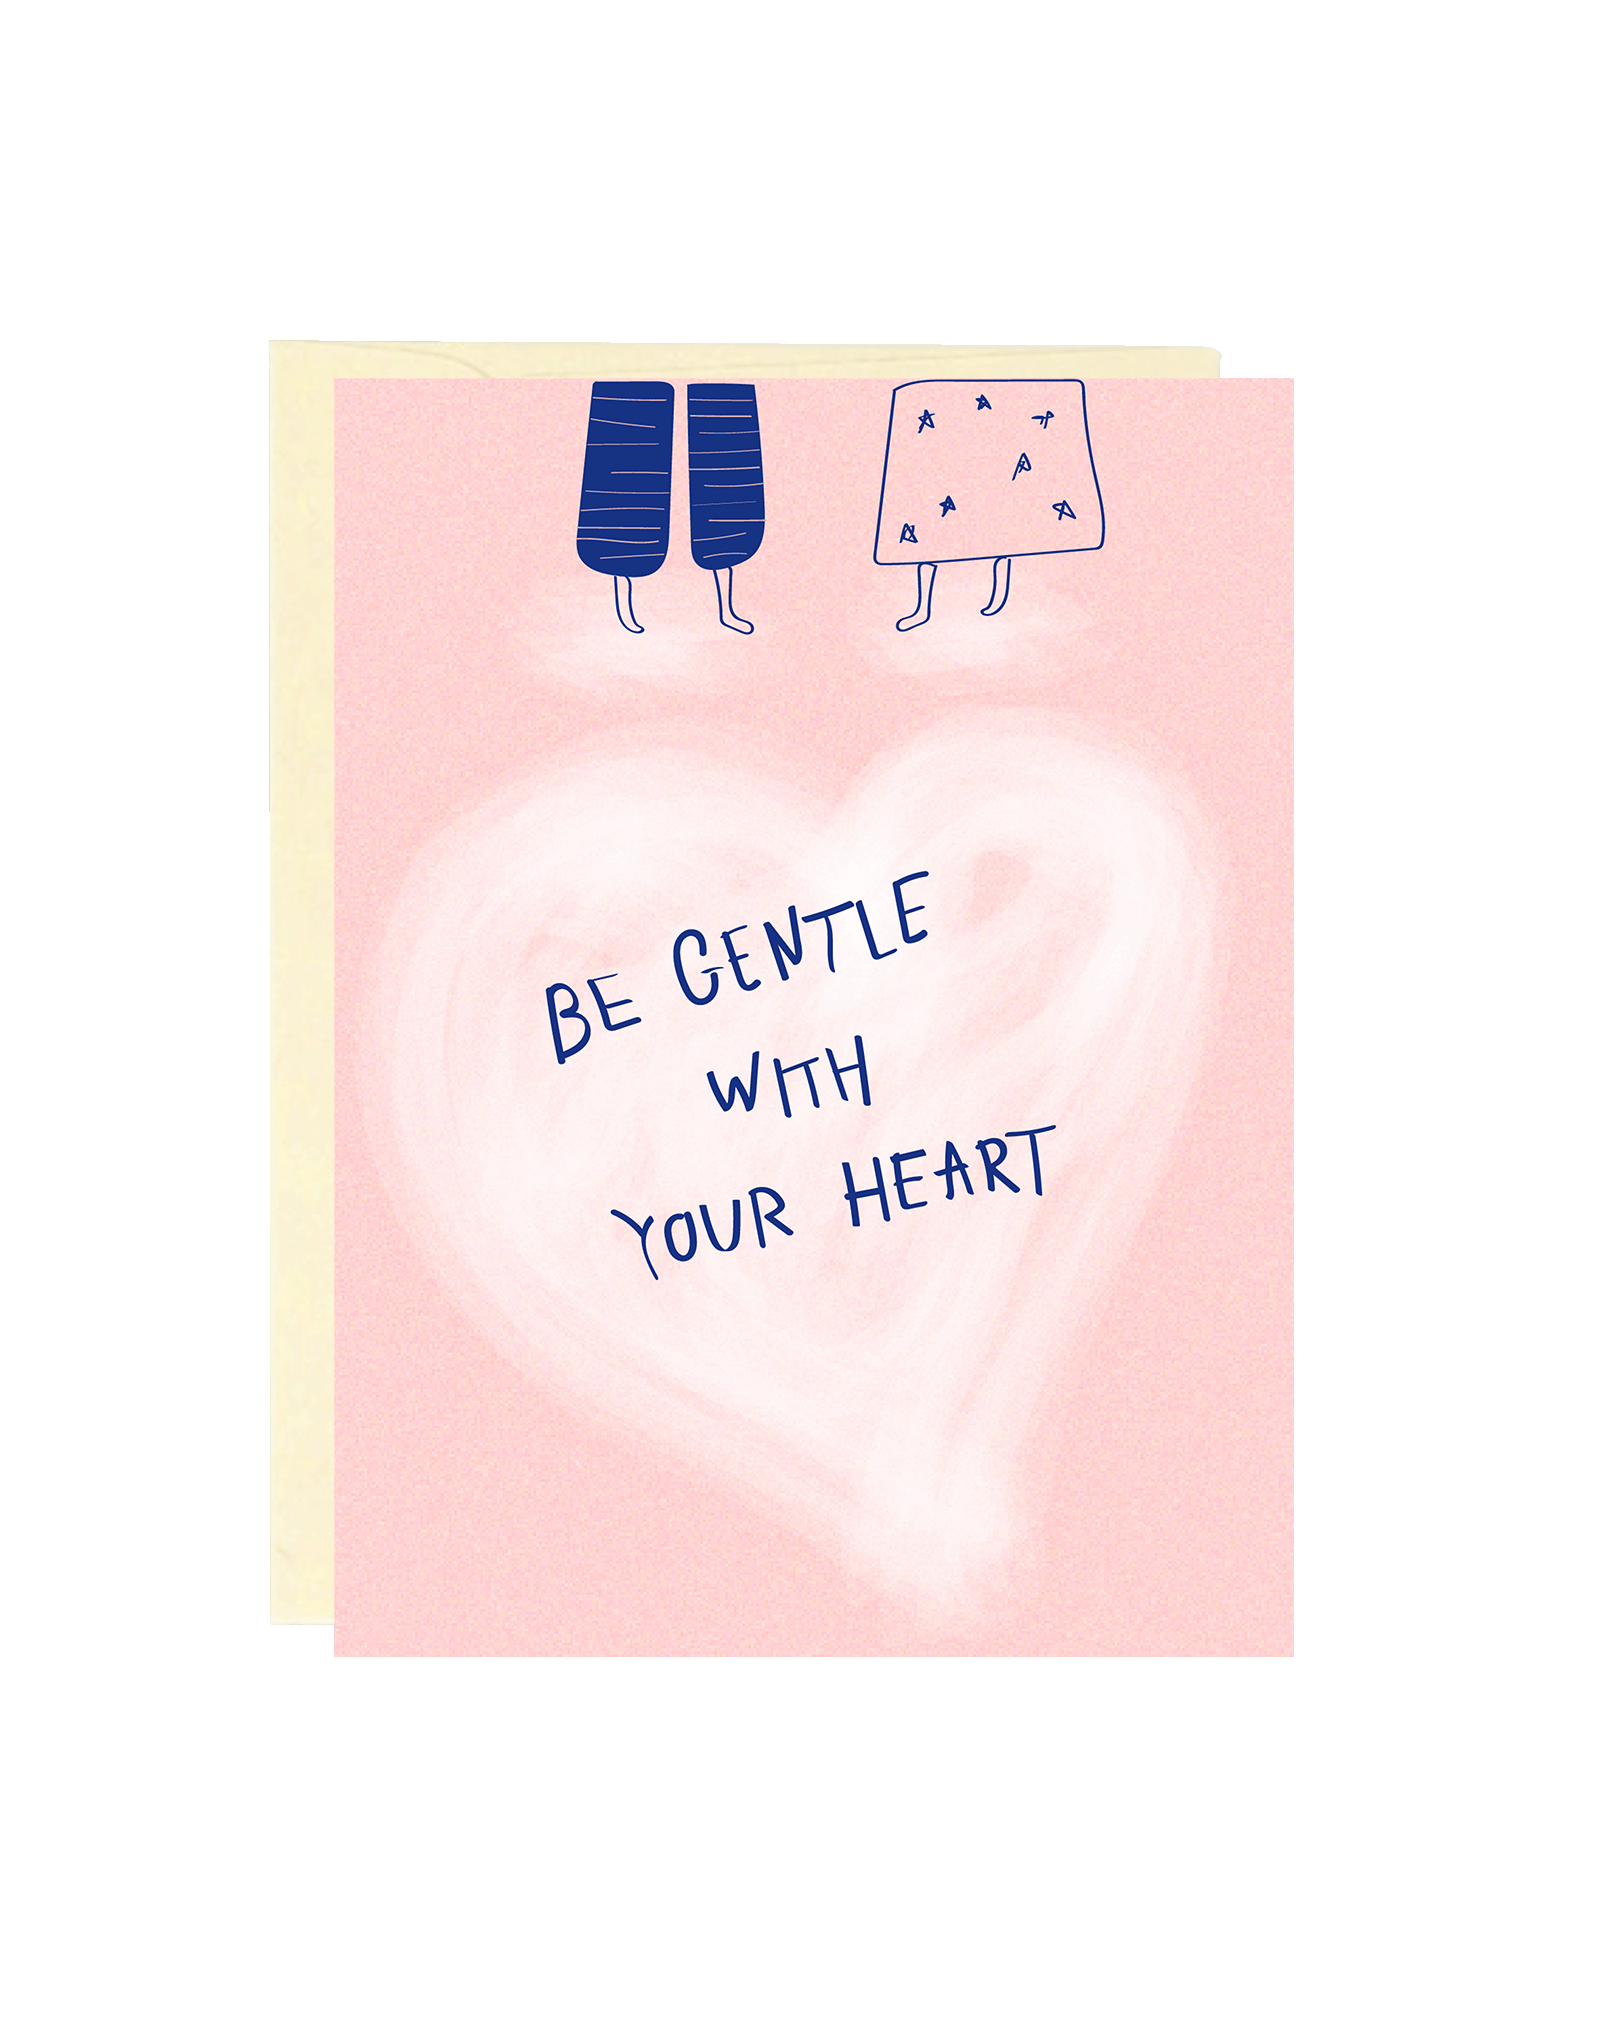 LOVE CARD - Be Gentle With Your Heart